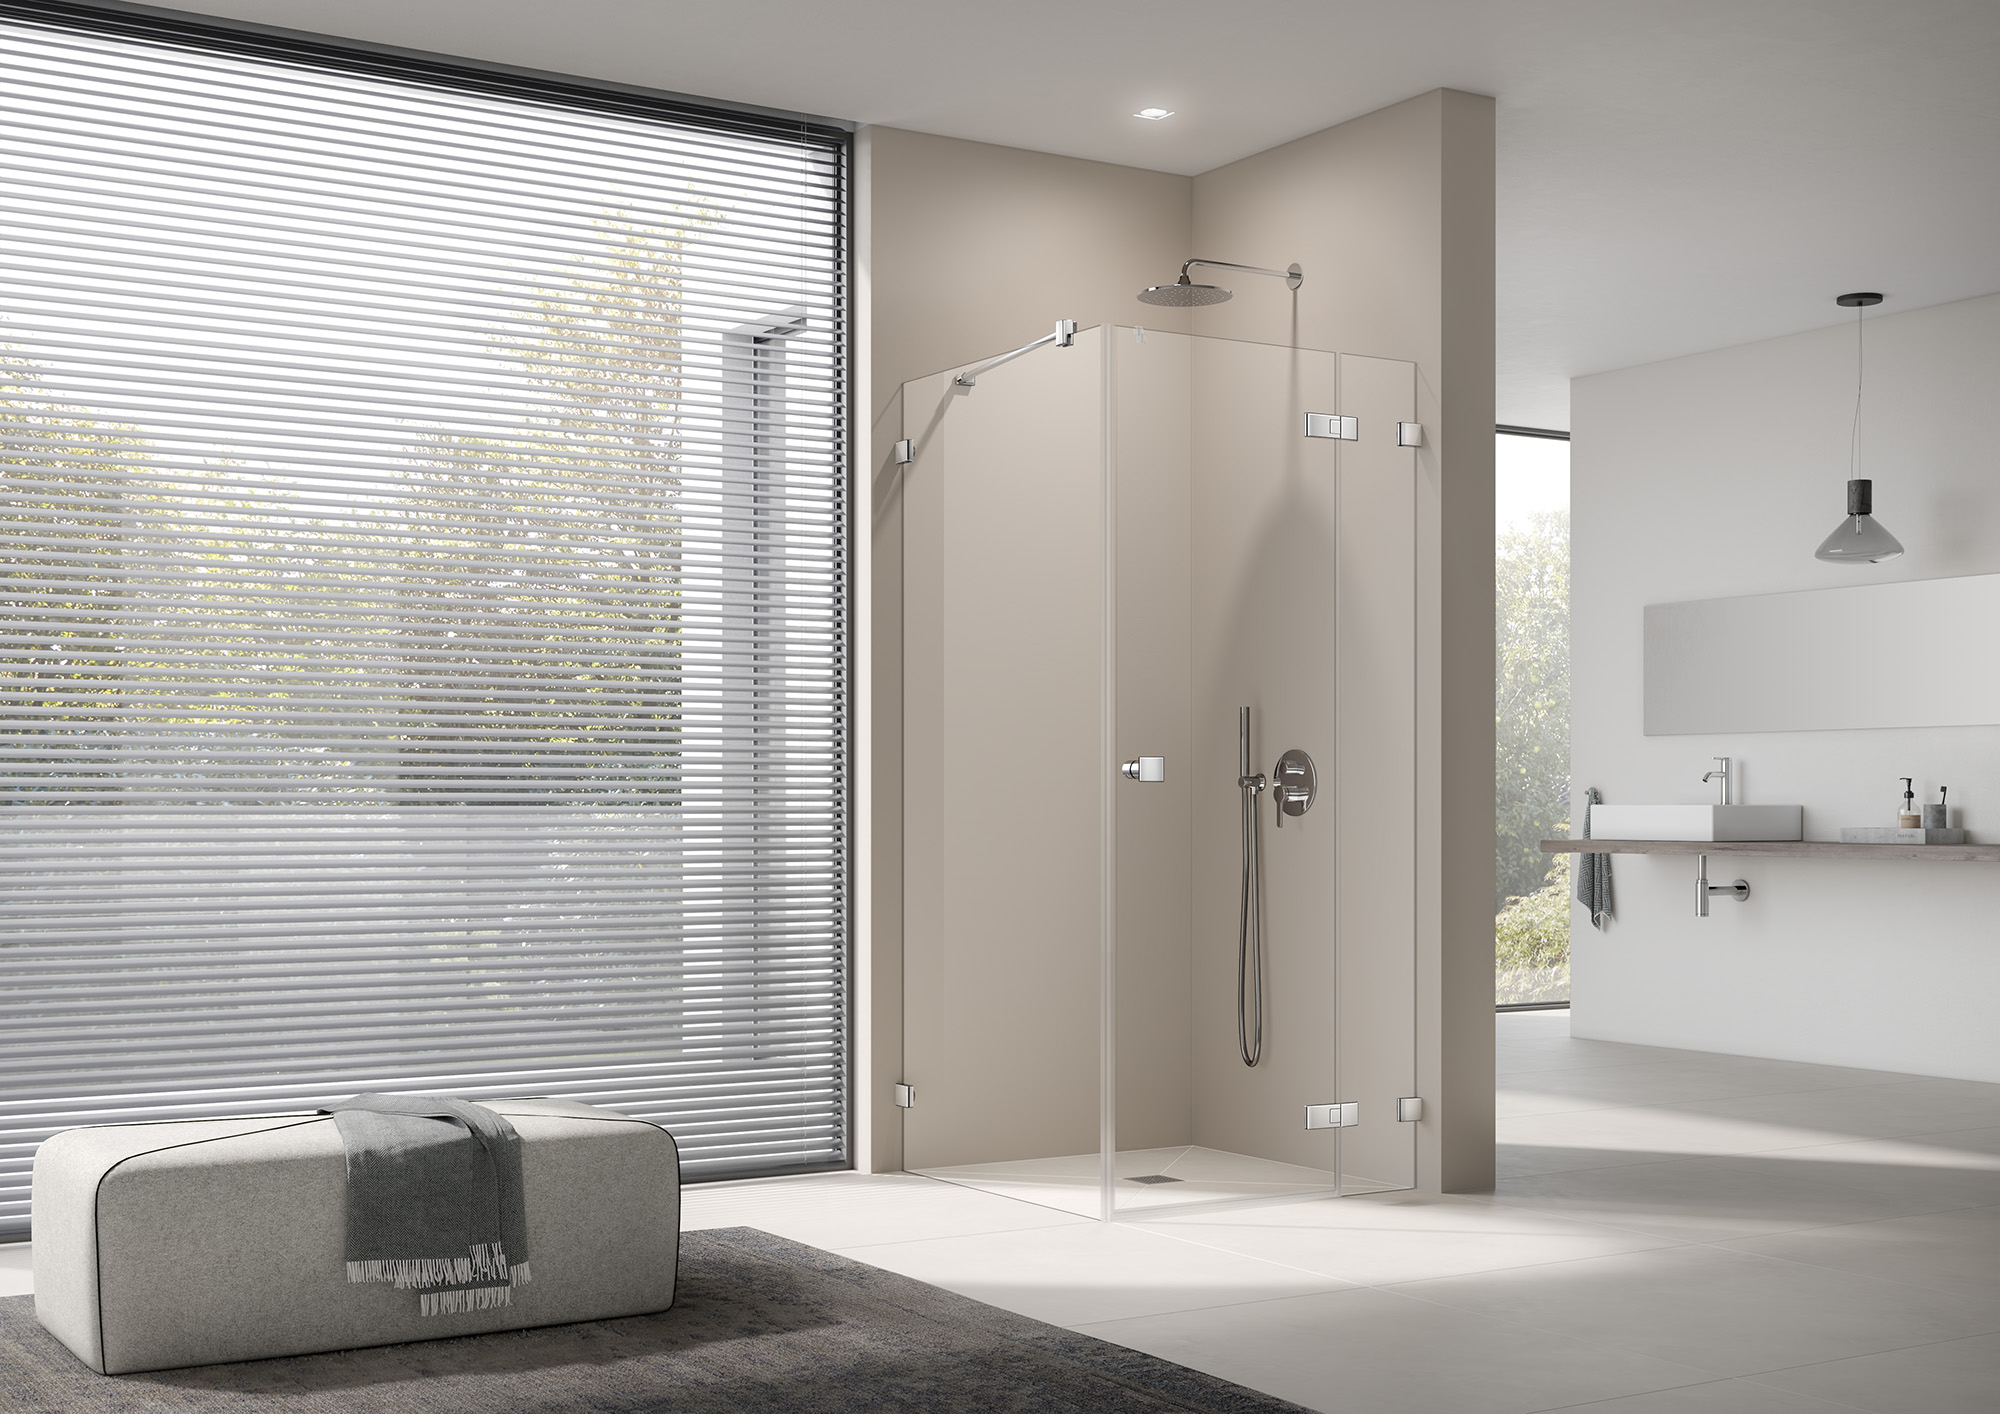 Kermi shower enclosure, MENA single panel hinged door with fixed panel with wall hinge